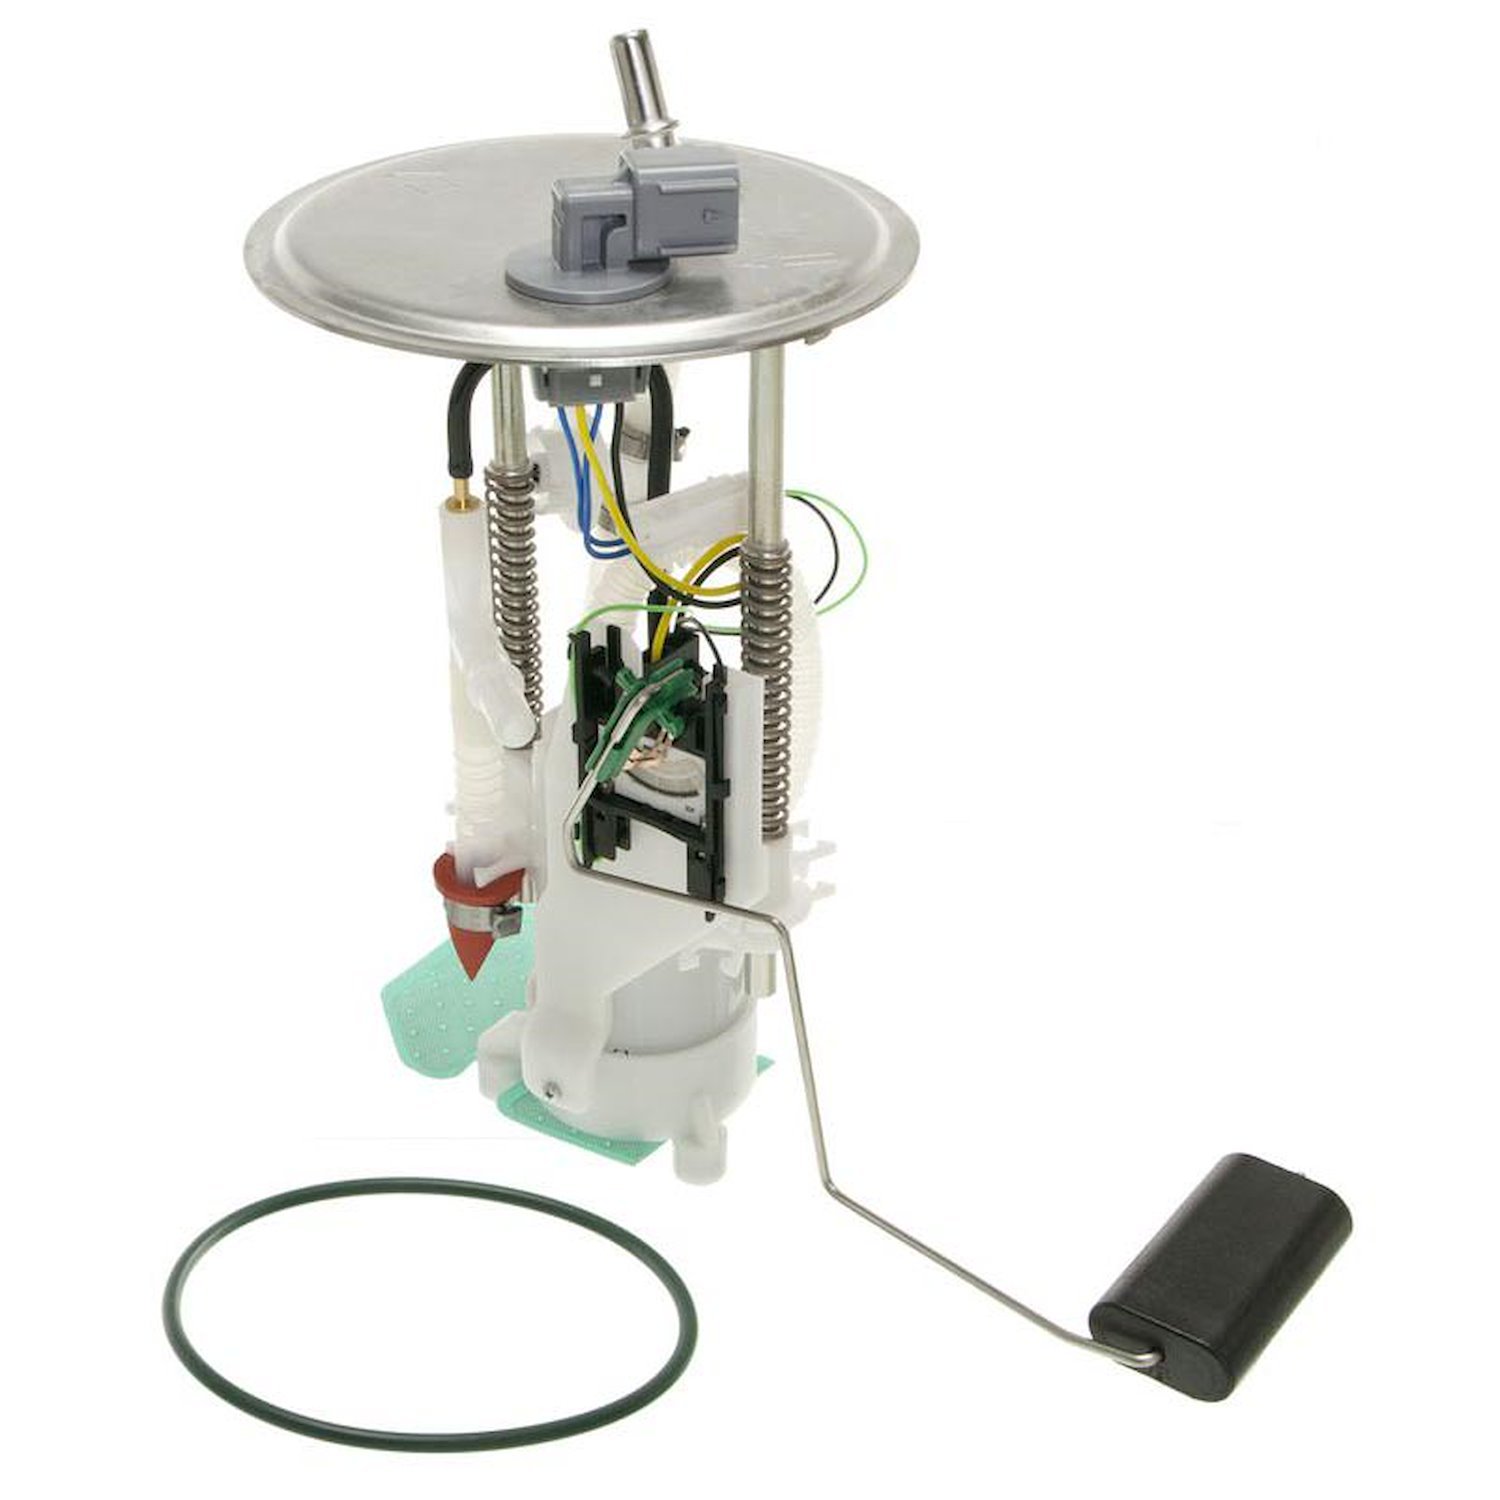 OE Ford Replacement Replacement Fuel Pump Module Assembly for 2005 Mustang